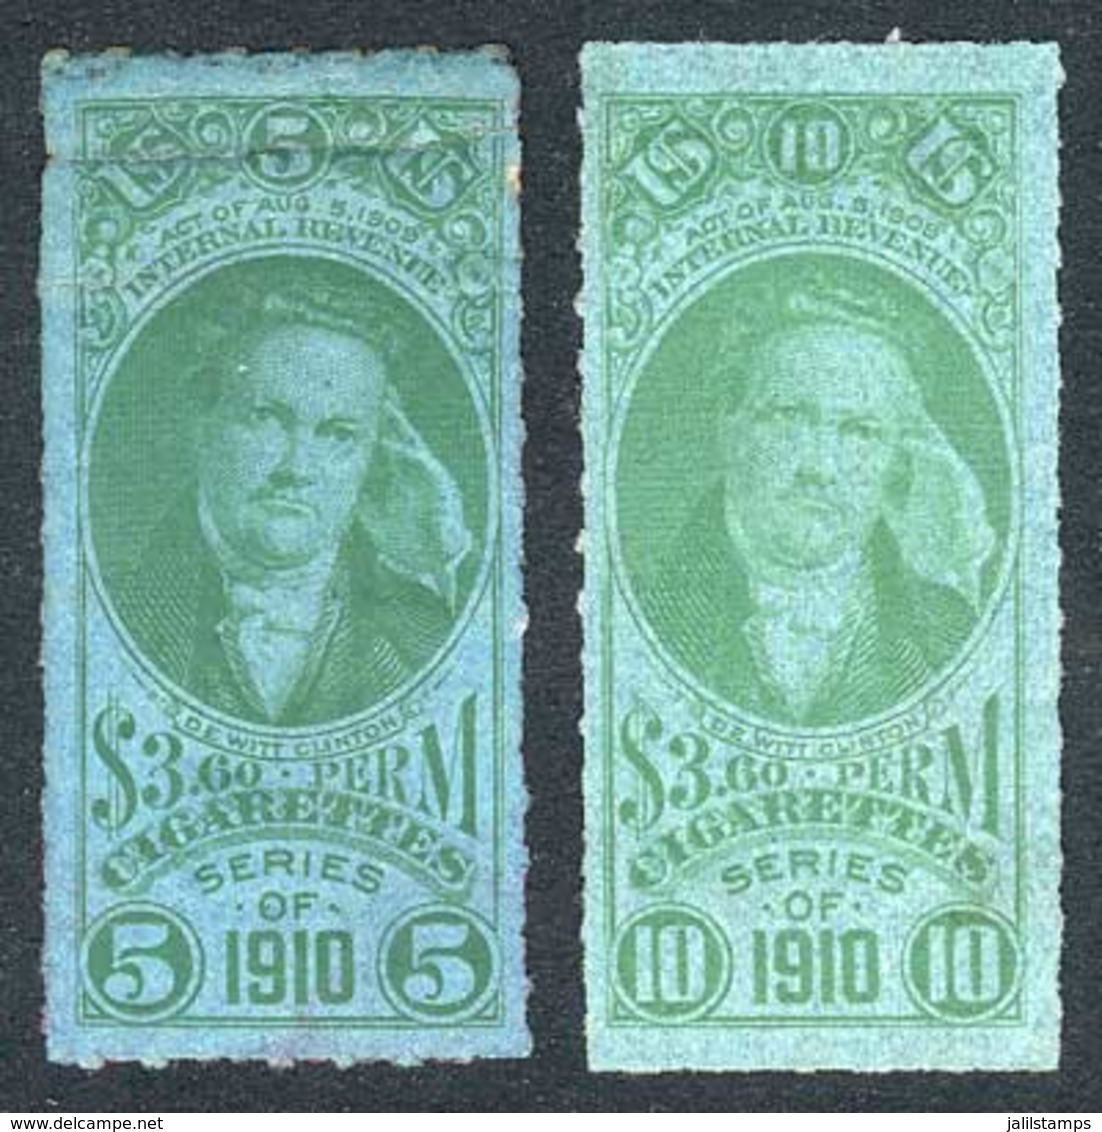 UNITED STATES: CIGARETTES: Year 1910, 2 Examples For 5 And 10 Printed In Green On Bluish Paper, Fine Quality! - Revenues